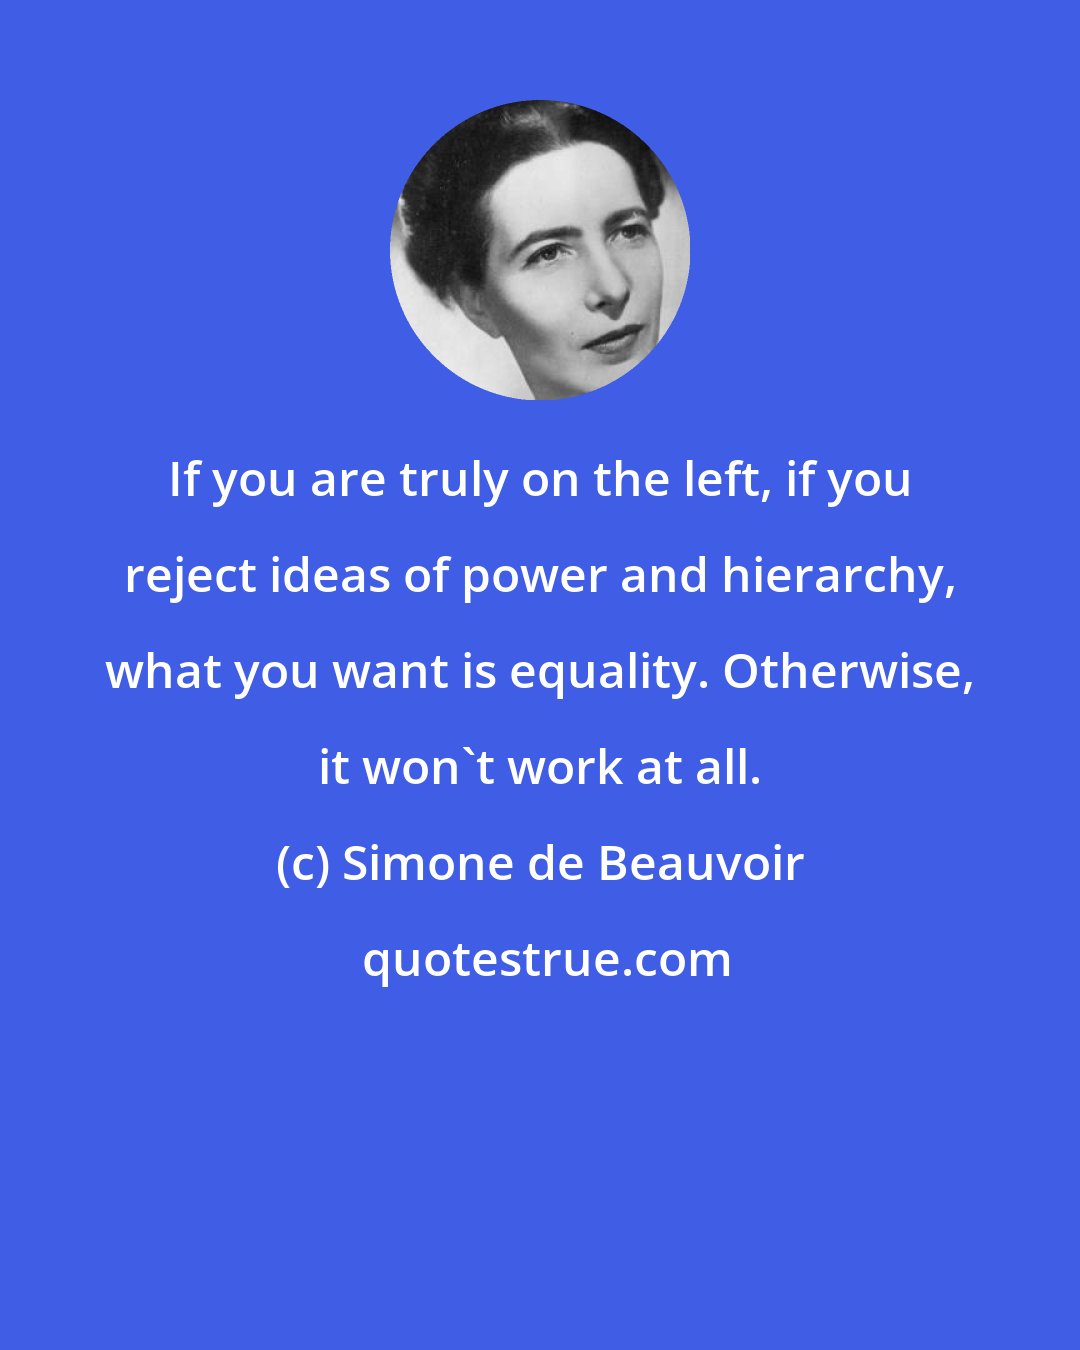 Simone de Beauvoir: If you are truly on the left, if you reject ideas of power and hierarchy, what you want is equality. Otherwise, it won't work at all.